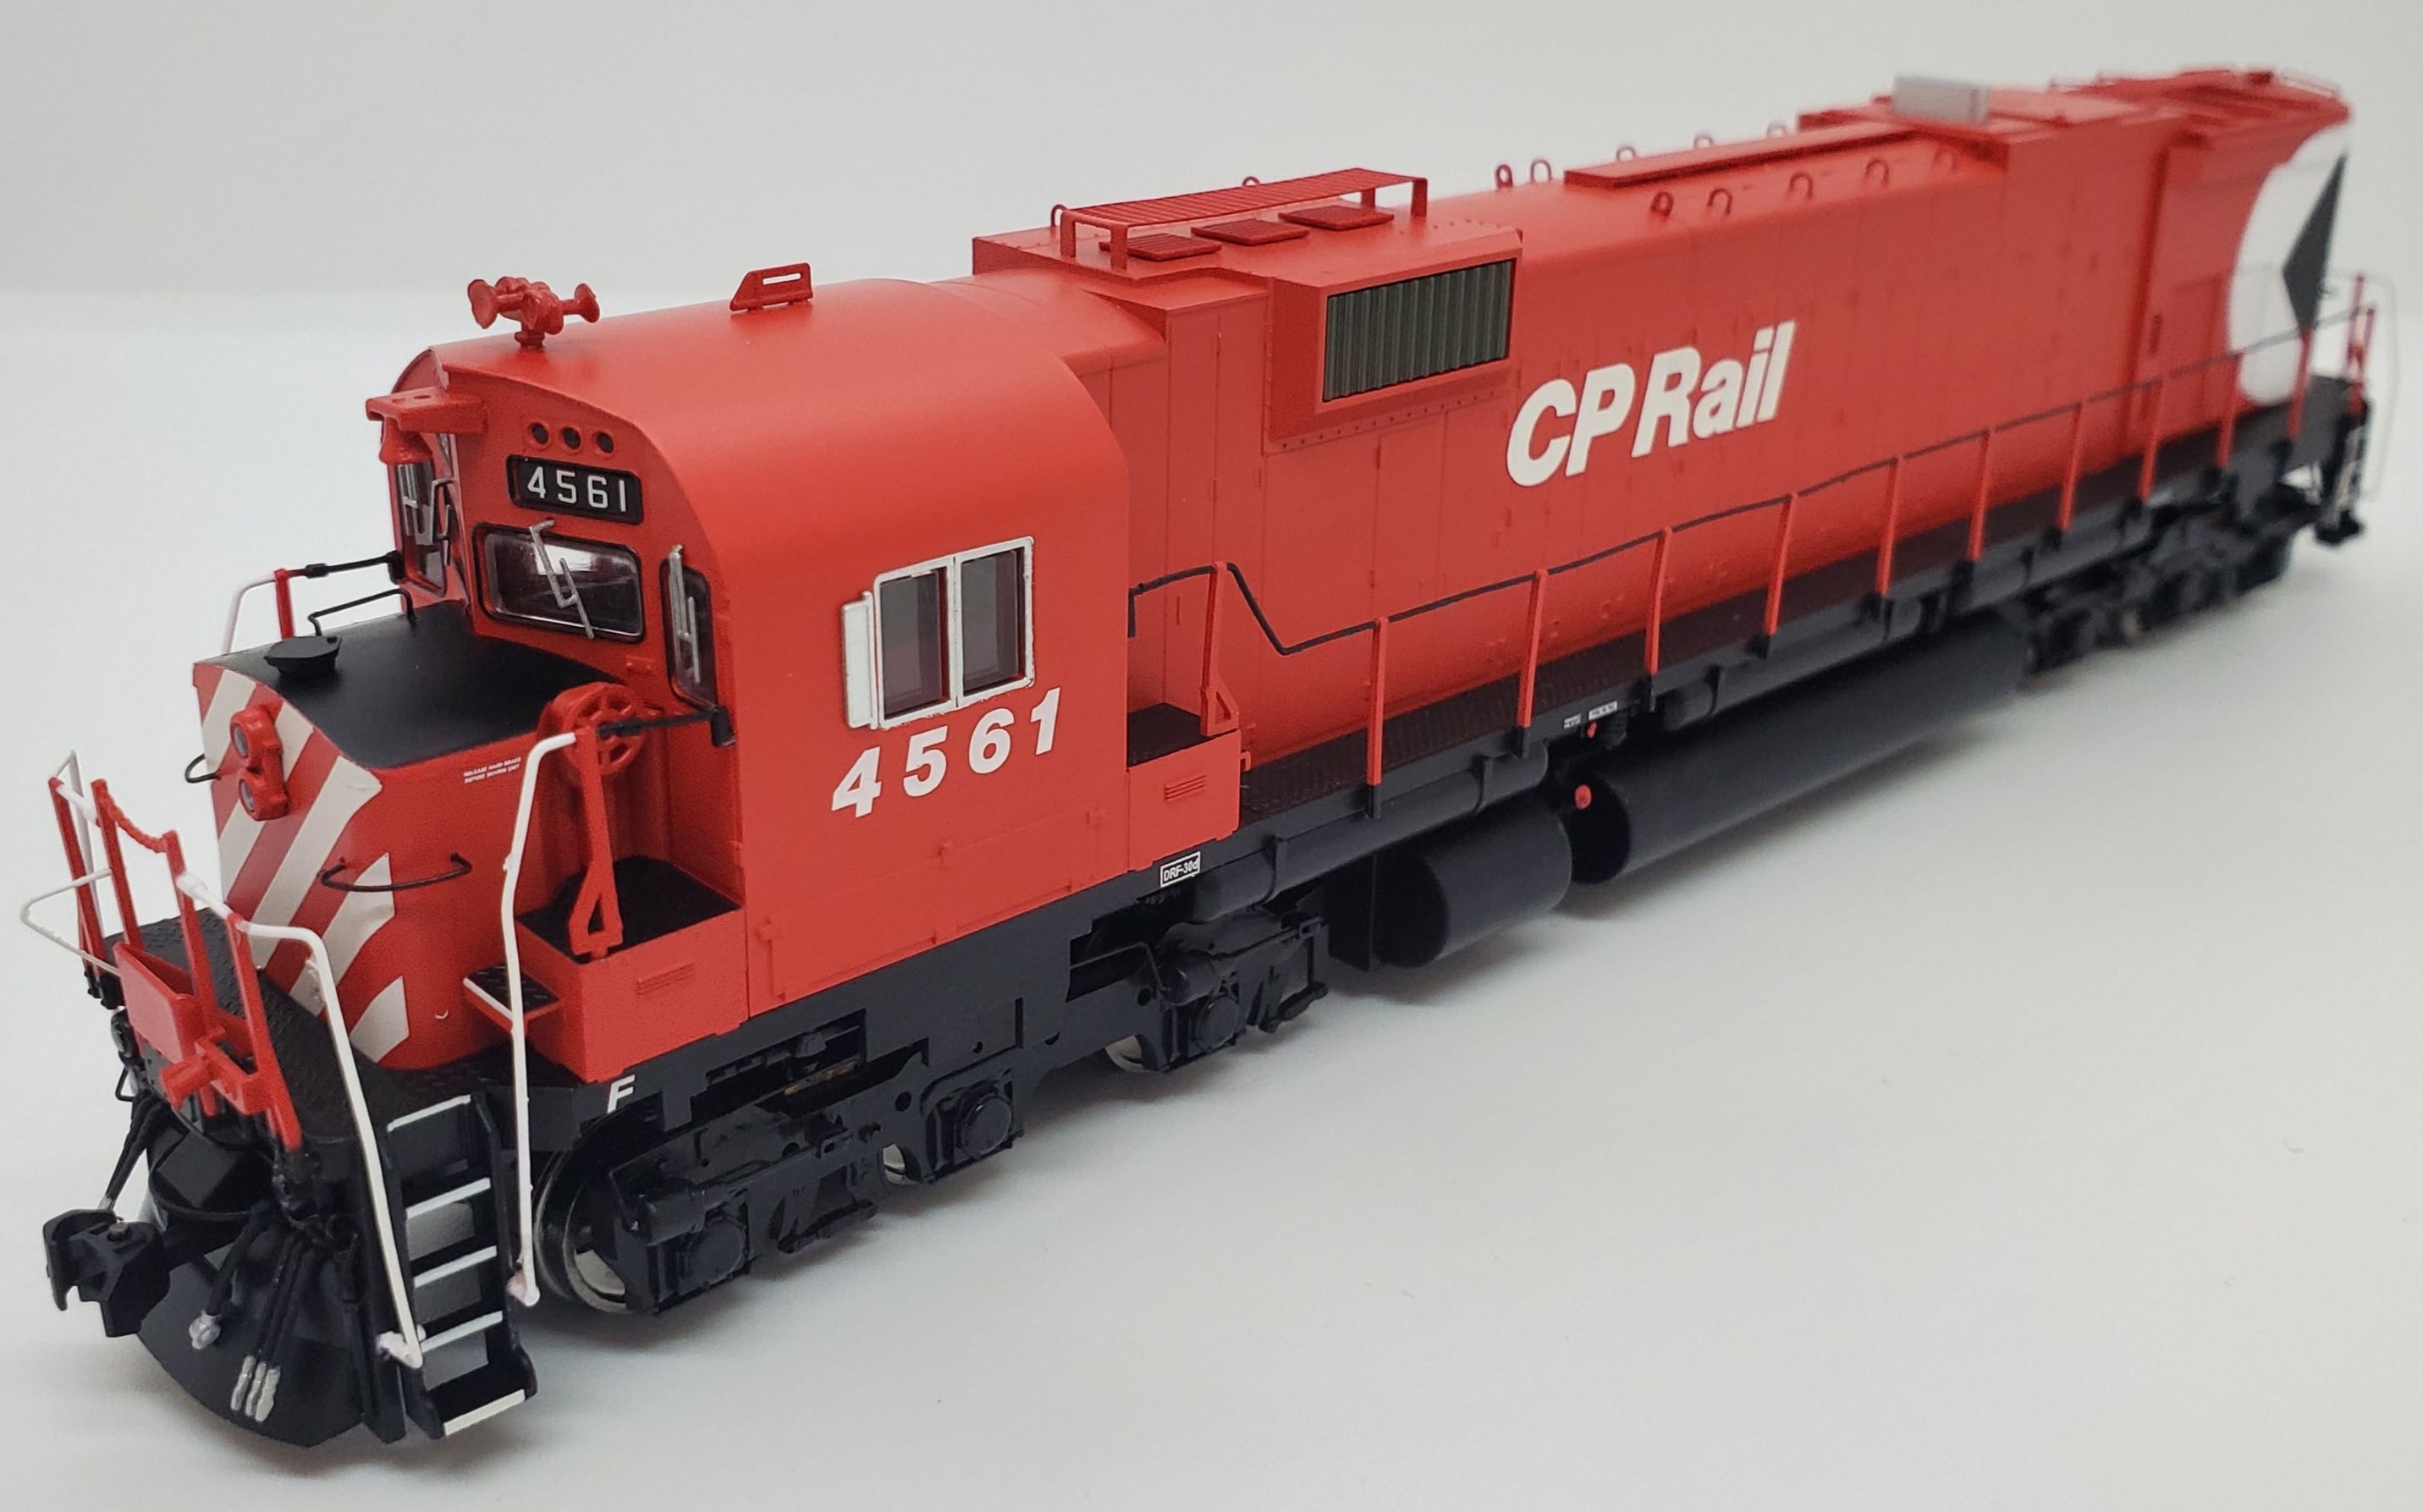 Bowser 24845 - HO MLW M630 - DCC & Sound - CP Rail (Multimark) #4561